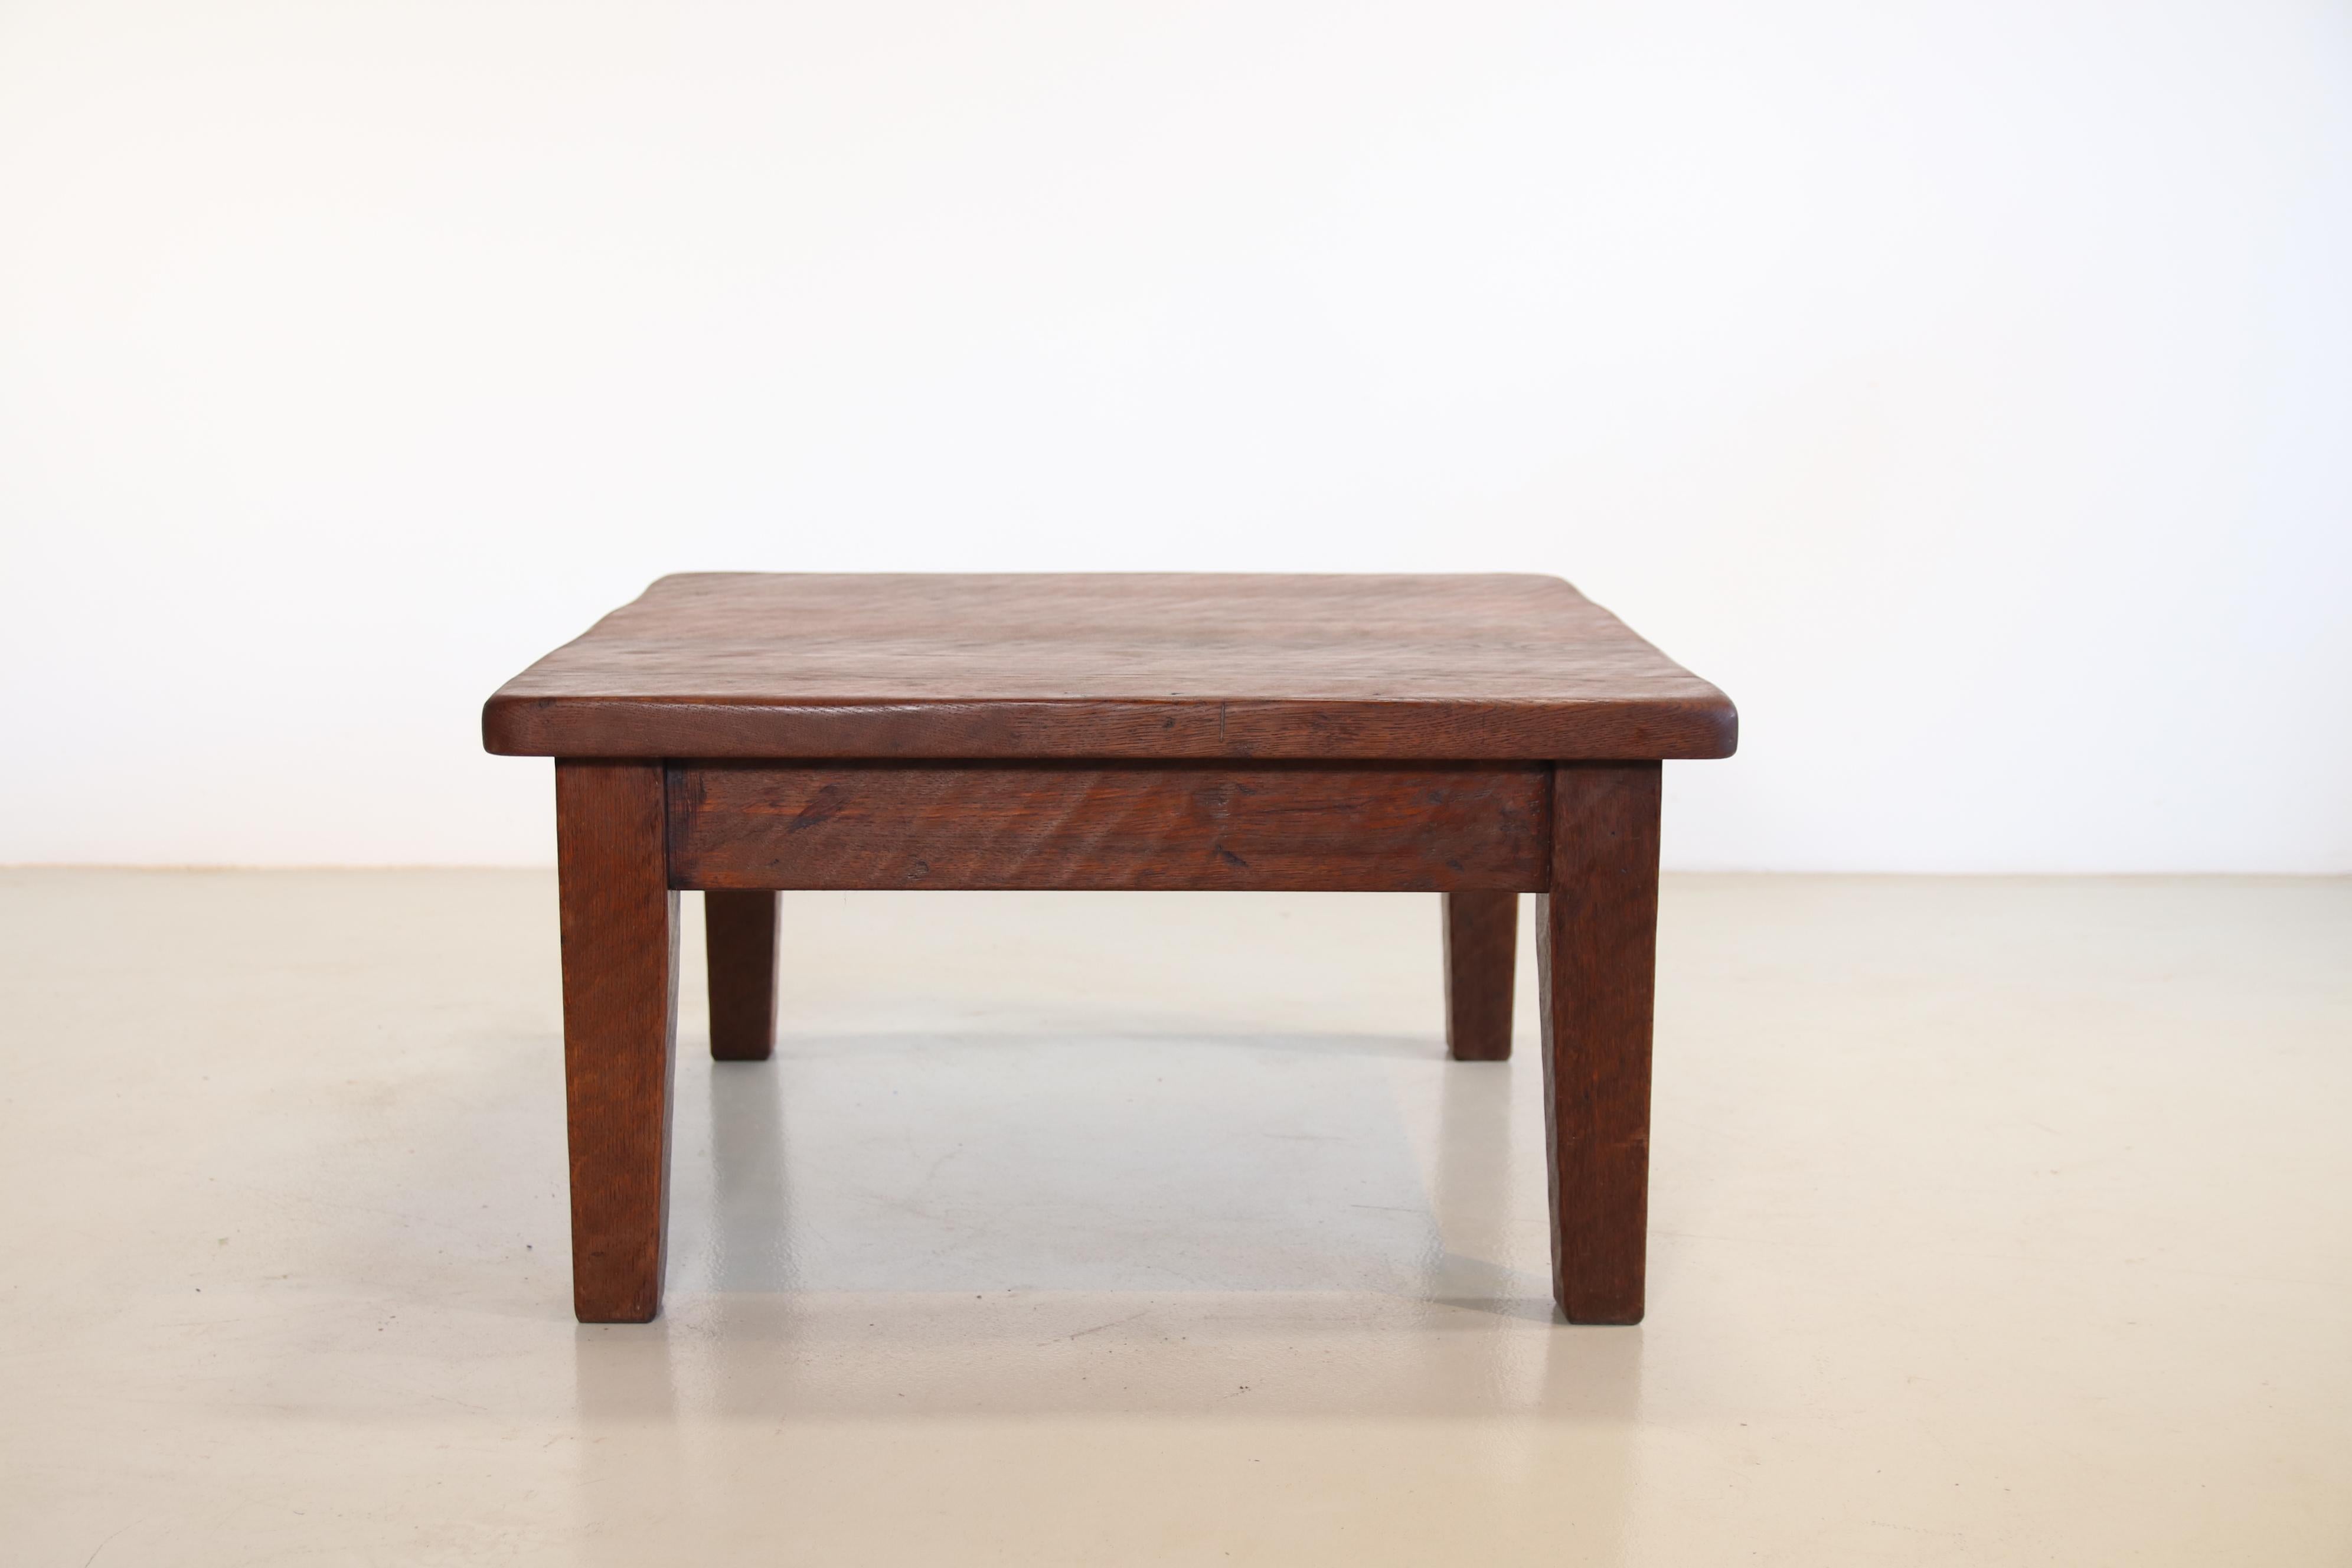 Brutalist coffee table. Traditionally made from solid oak. A very nice detail are the ribs in the wood that are very subtly processed on both the top and the legs. The robust table stands on four legs and has dimensions of: 80 cm by 80 cm and is 43